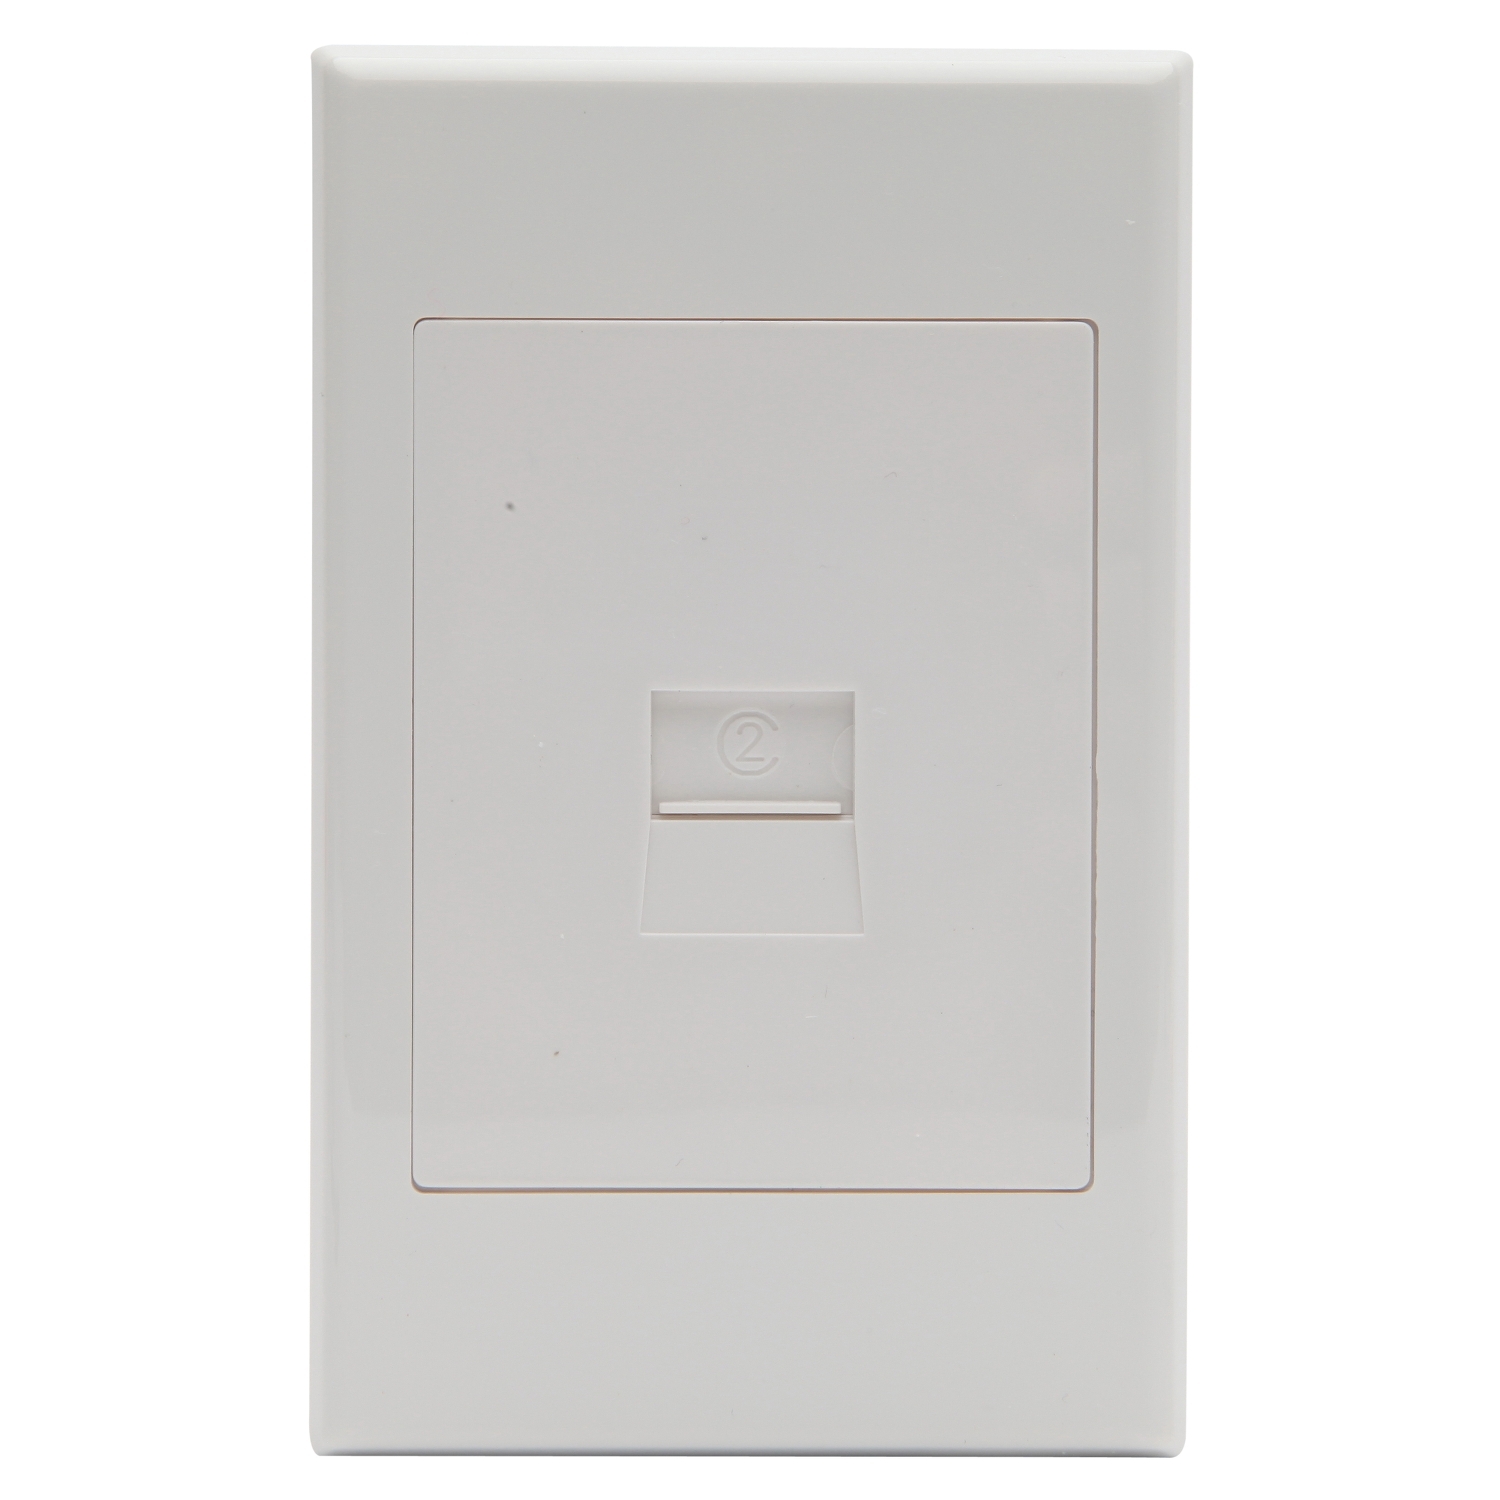 PDL 600 Series - Telephone Jack Outlet Plate BT Single 2-Wire - White